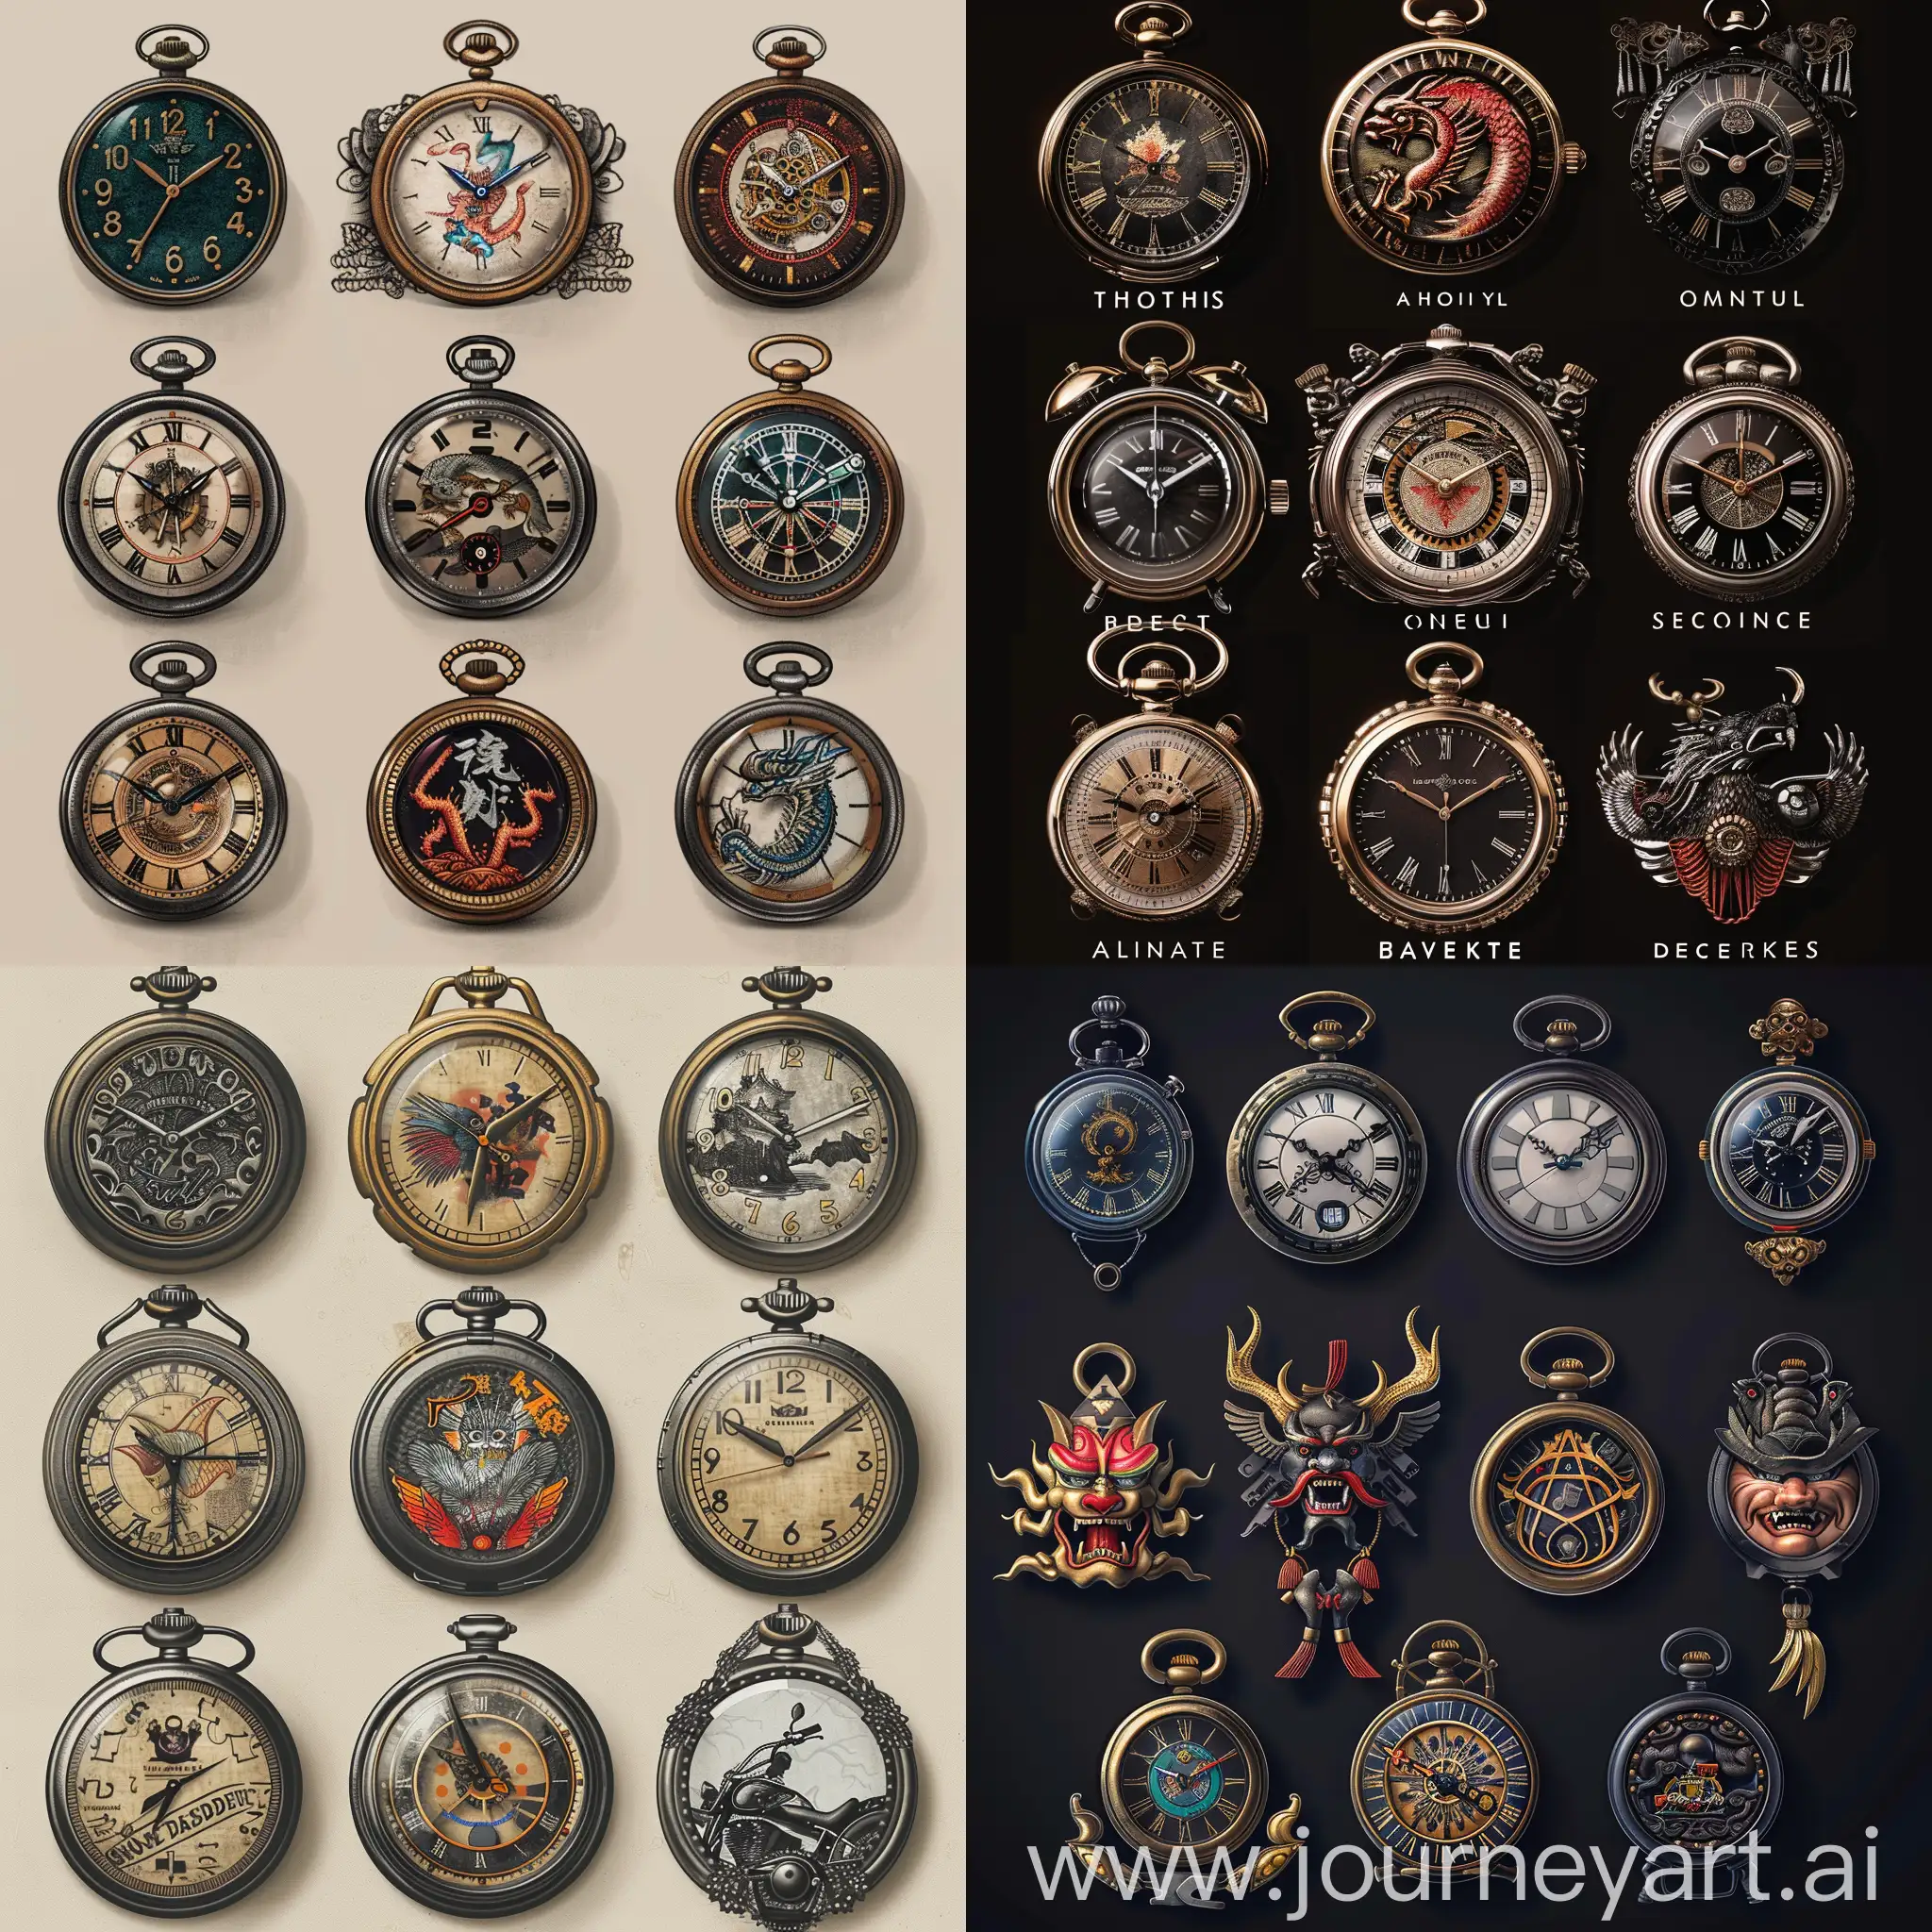 Japanese-and-Chinese-Inspired-Artifacts-Pocket-Watches-and-Harley-Davidson